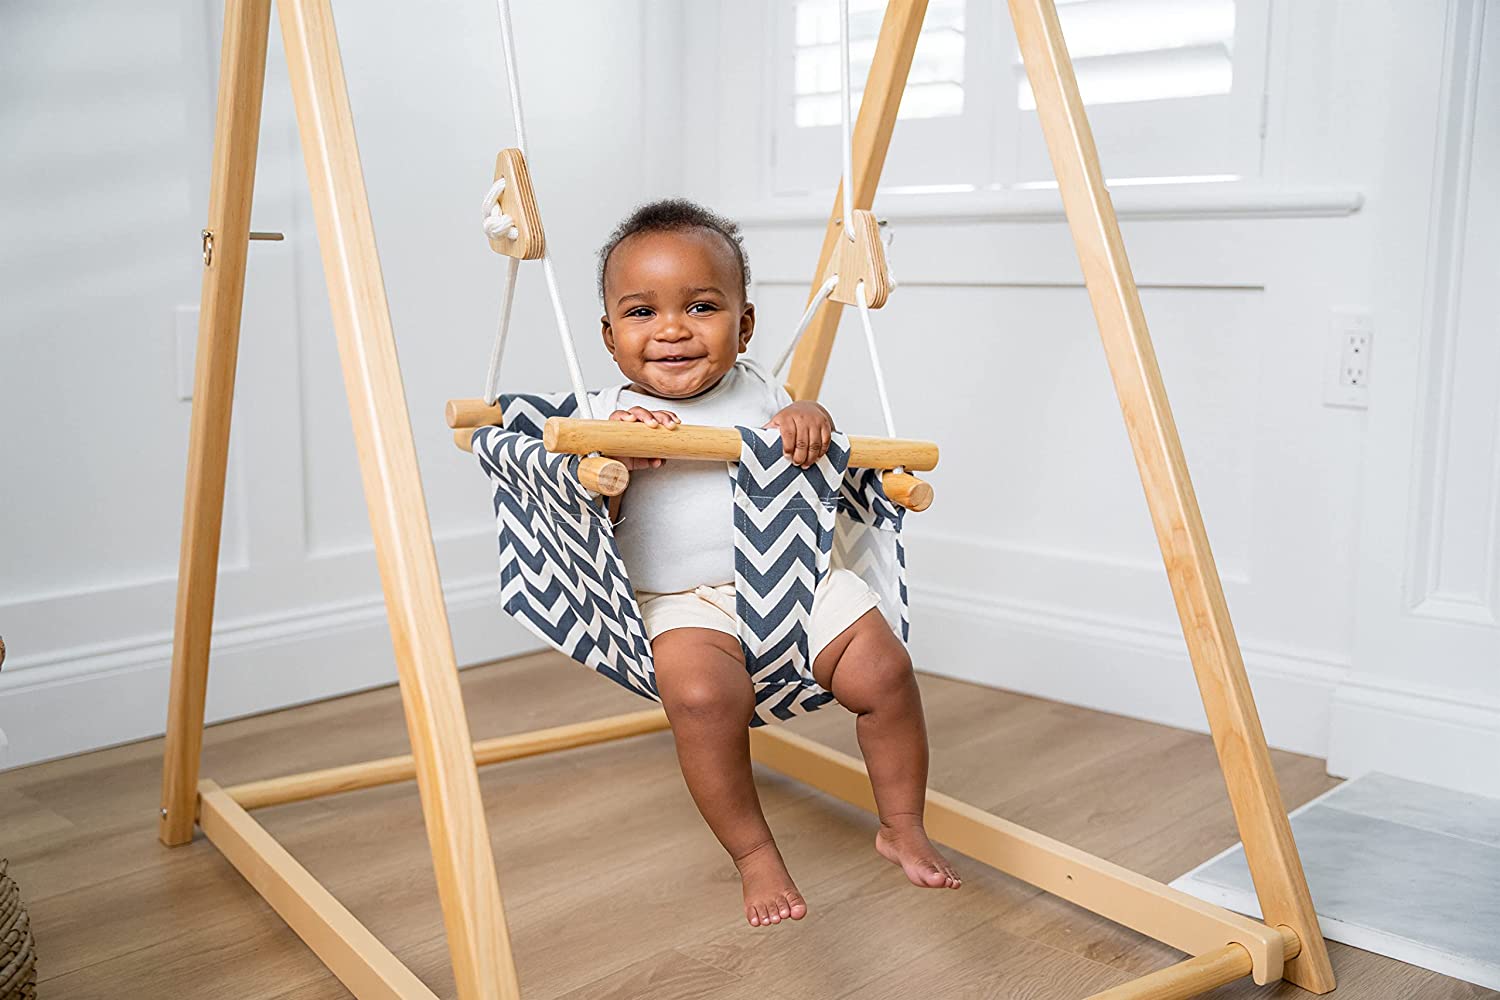 Spruce - Baby and Toddler Foldable Wooden Swing Set